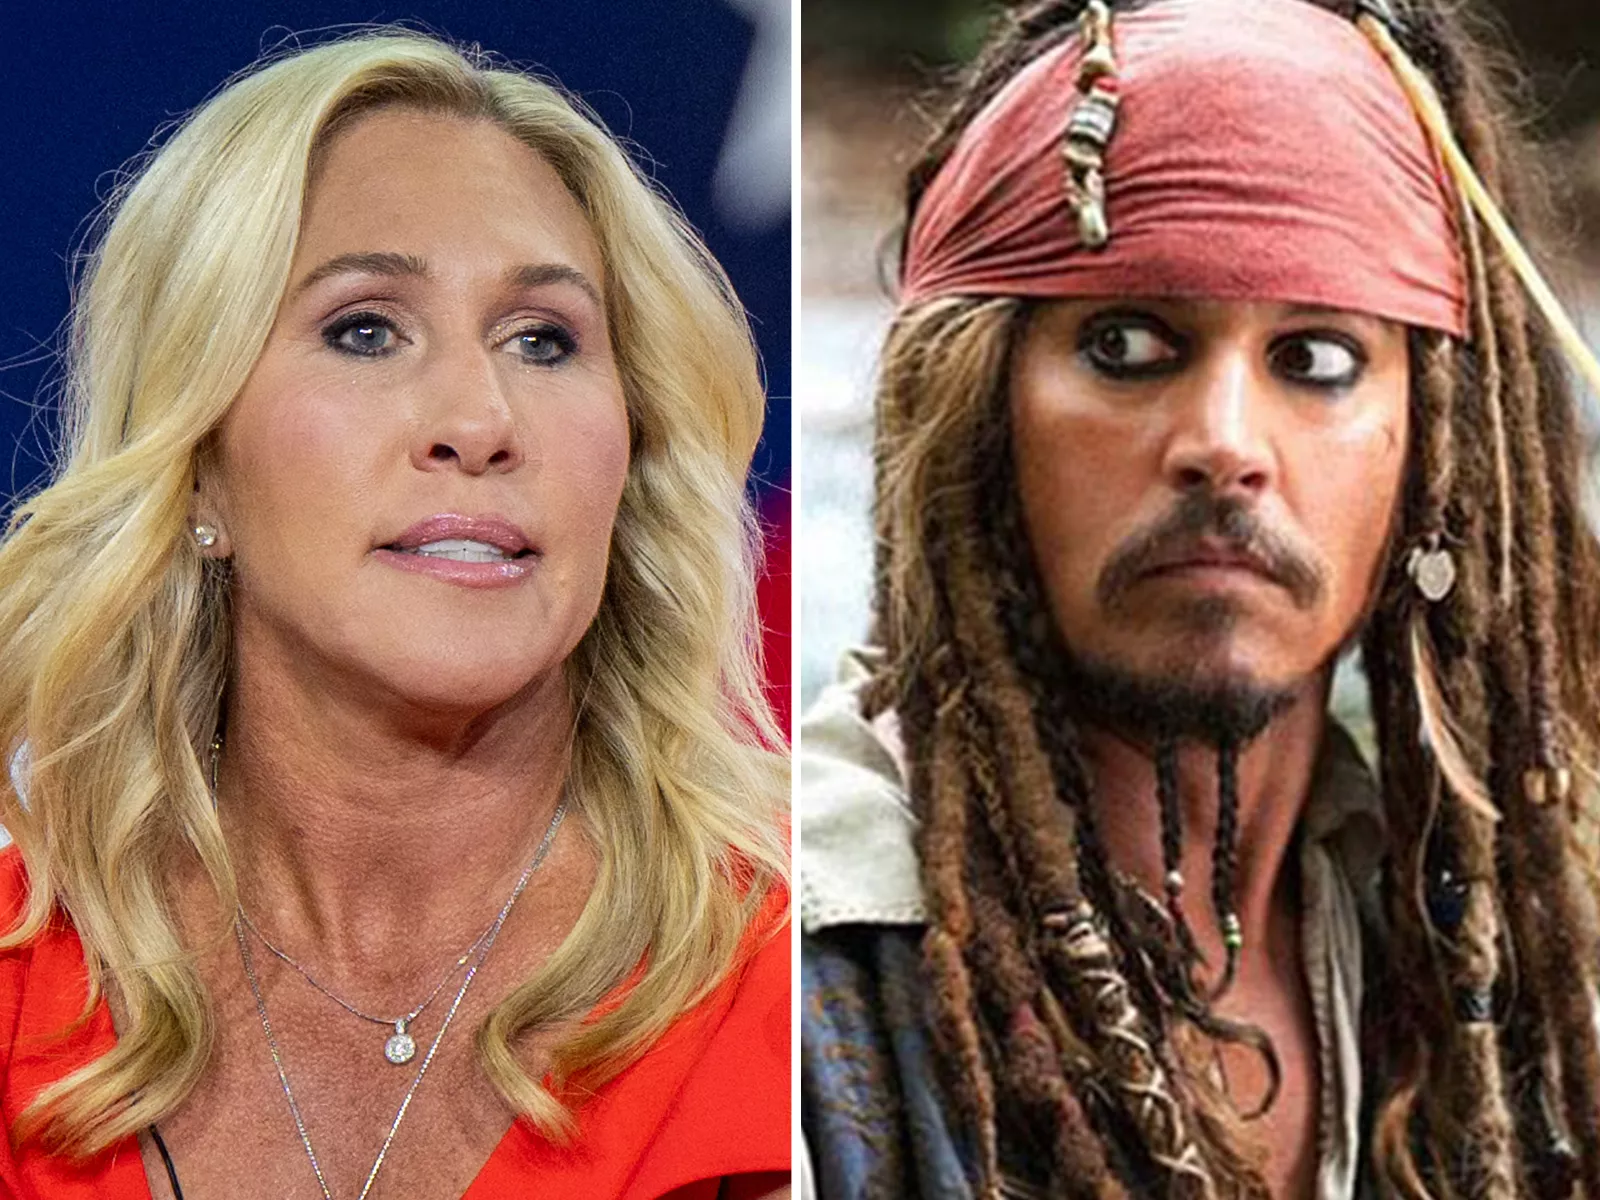 Pirates of the Caribbean' Cast: Where Are They Now?